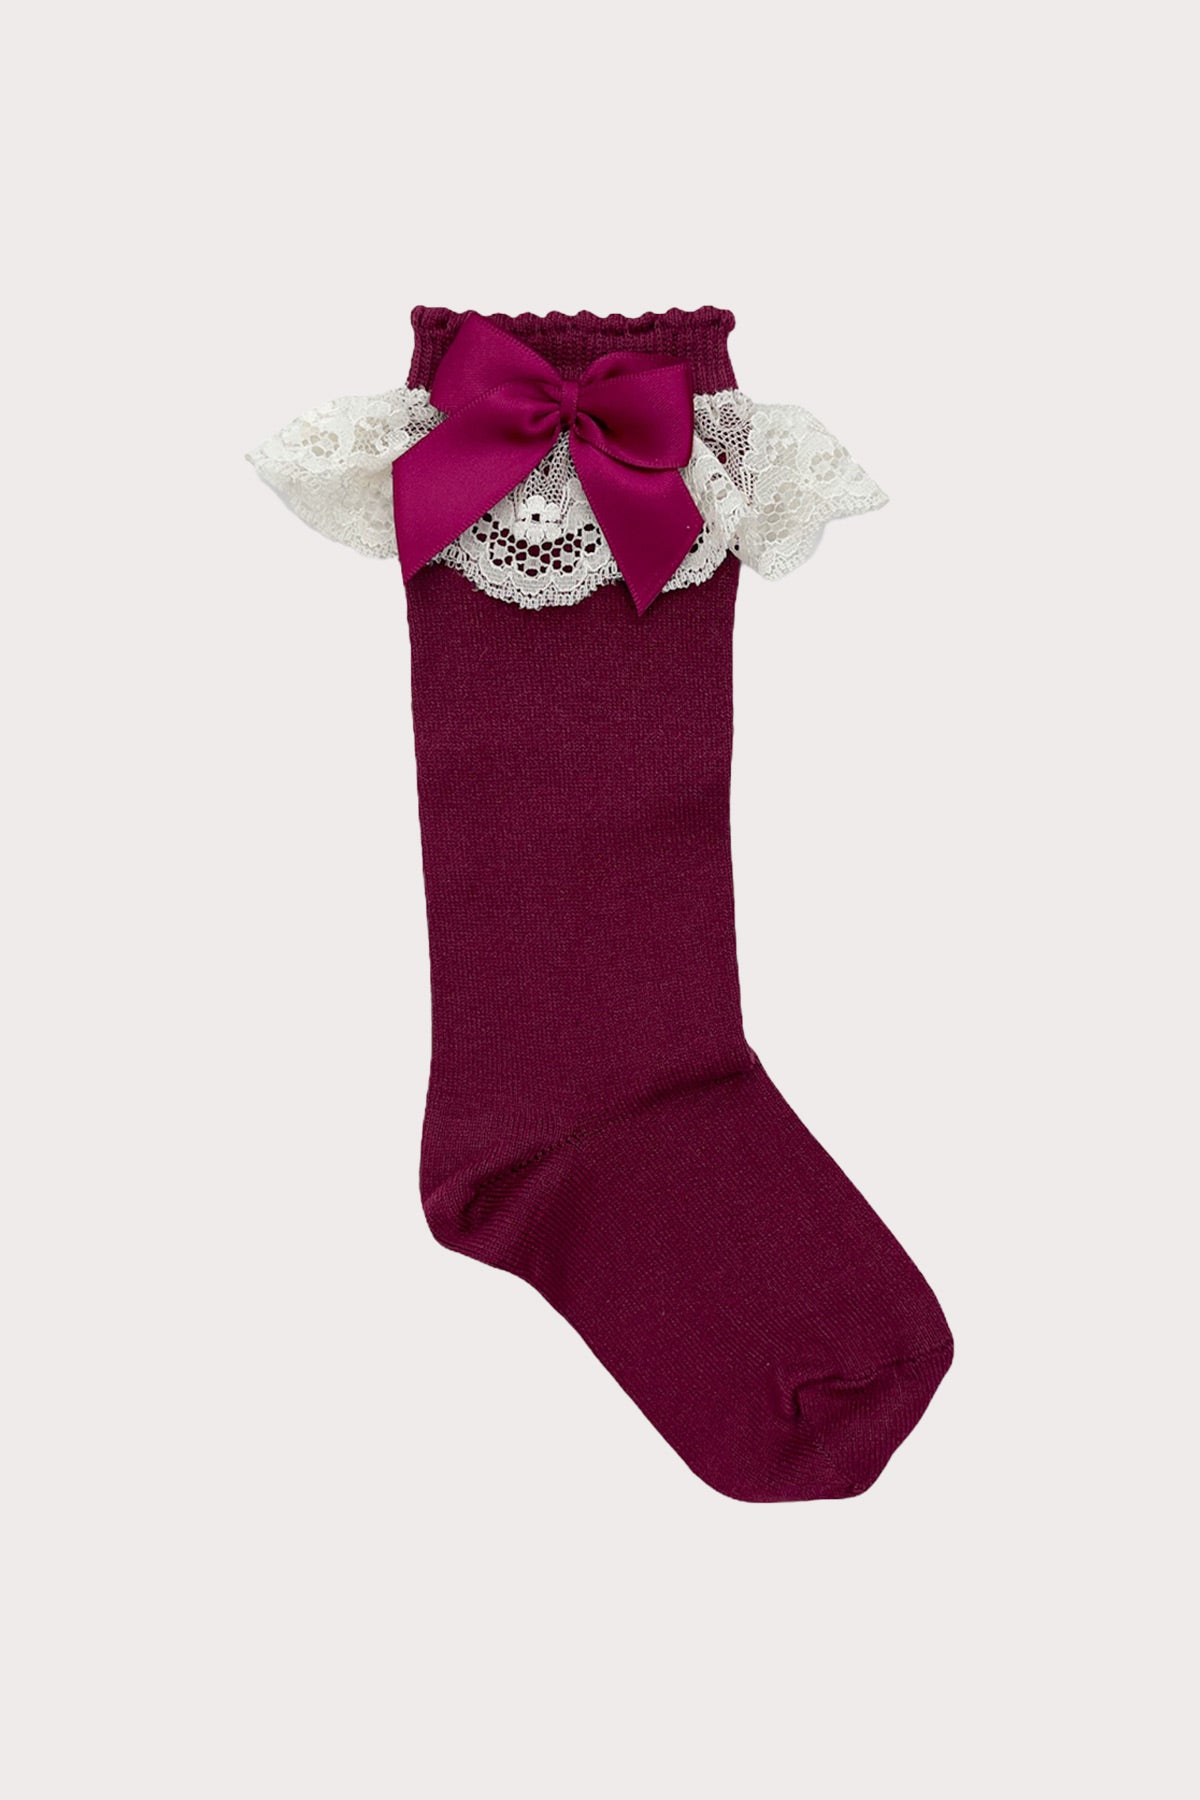 girls knee high socks in burgundy with spanish lace